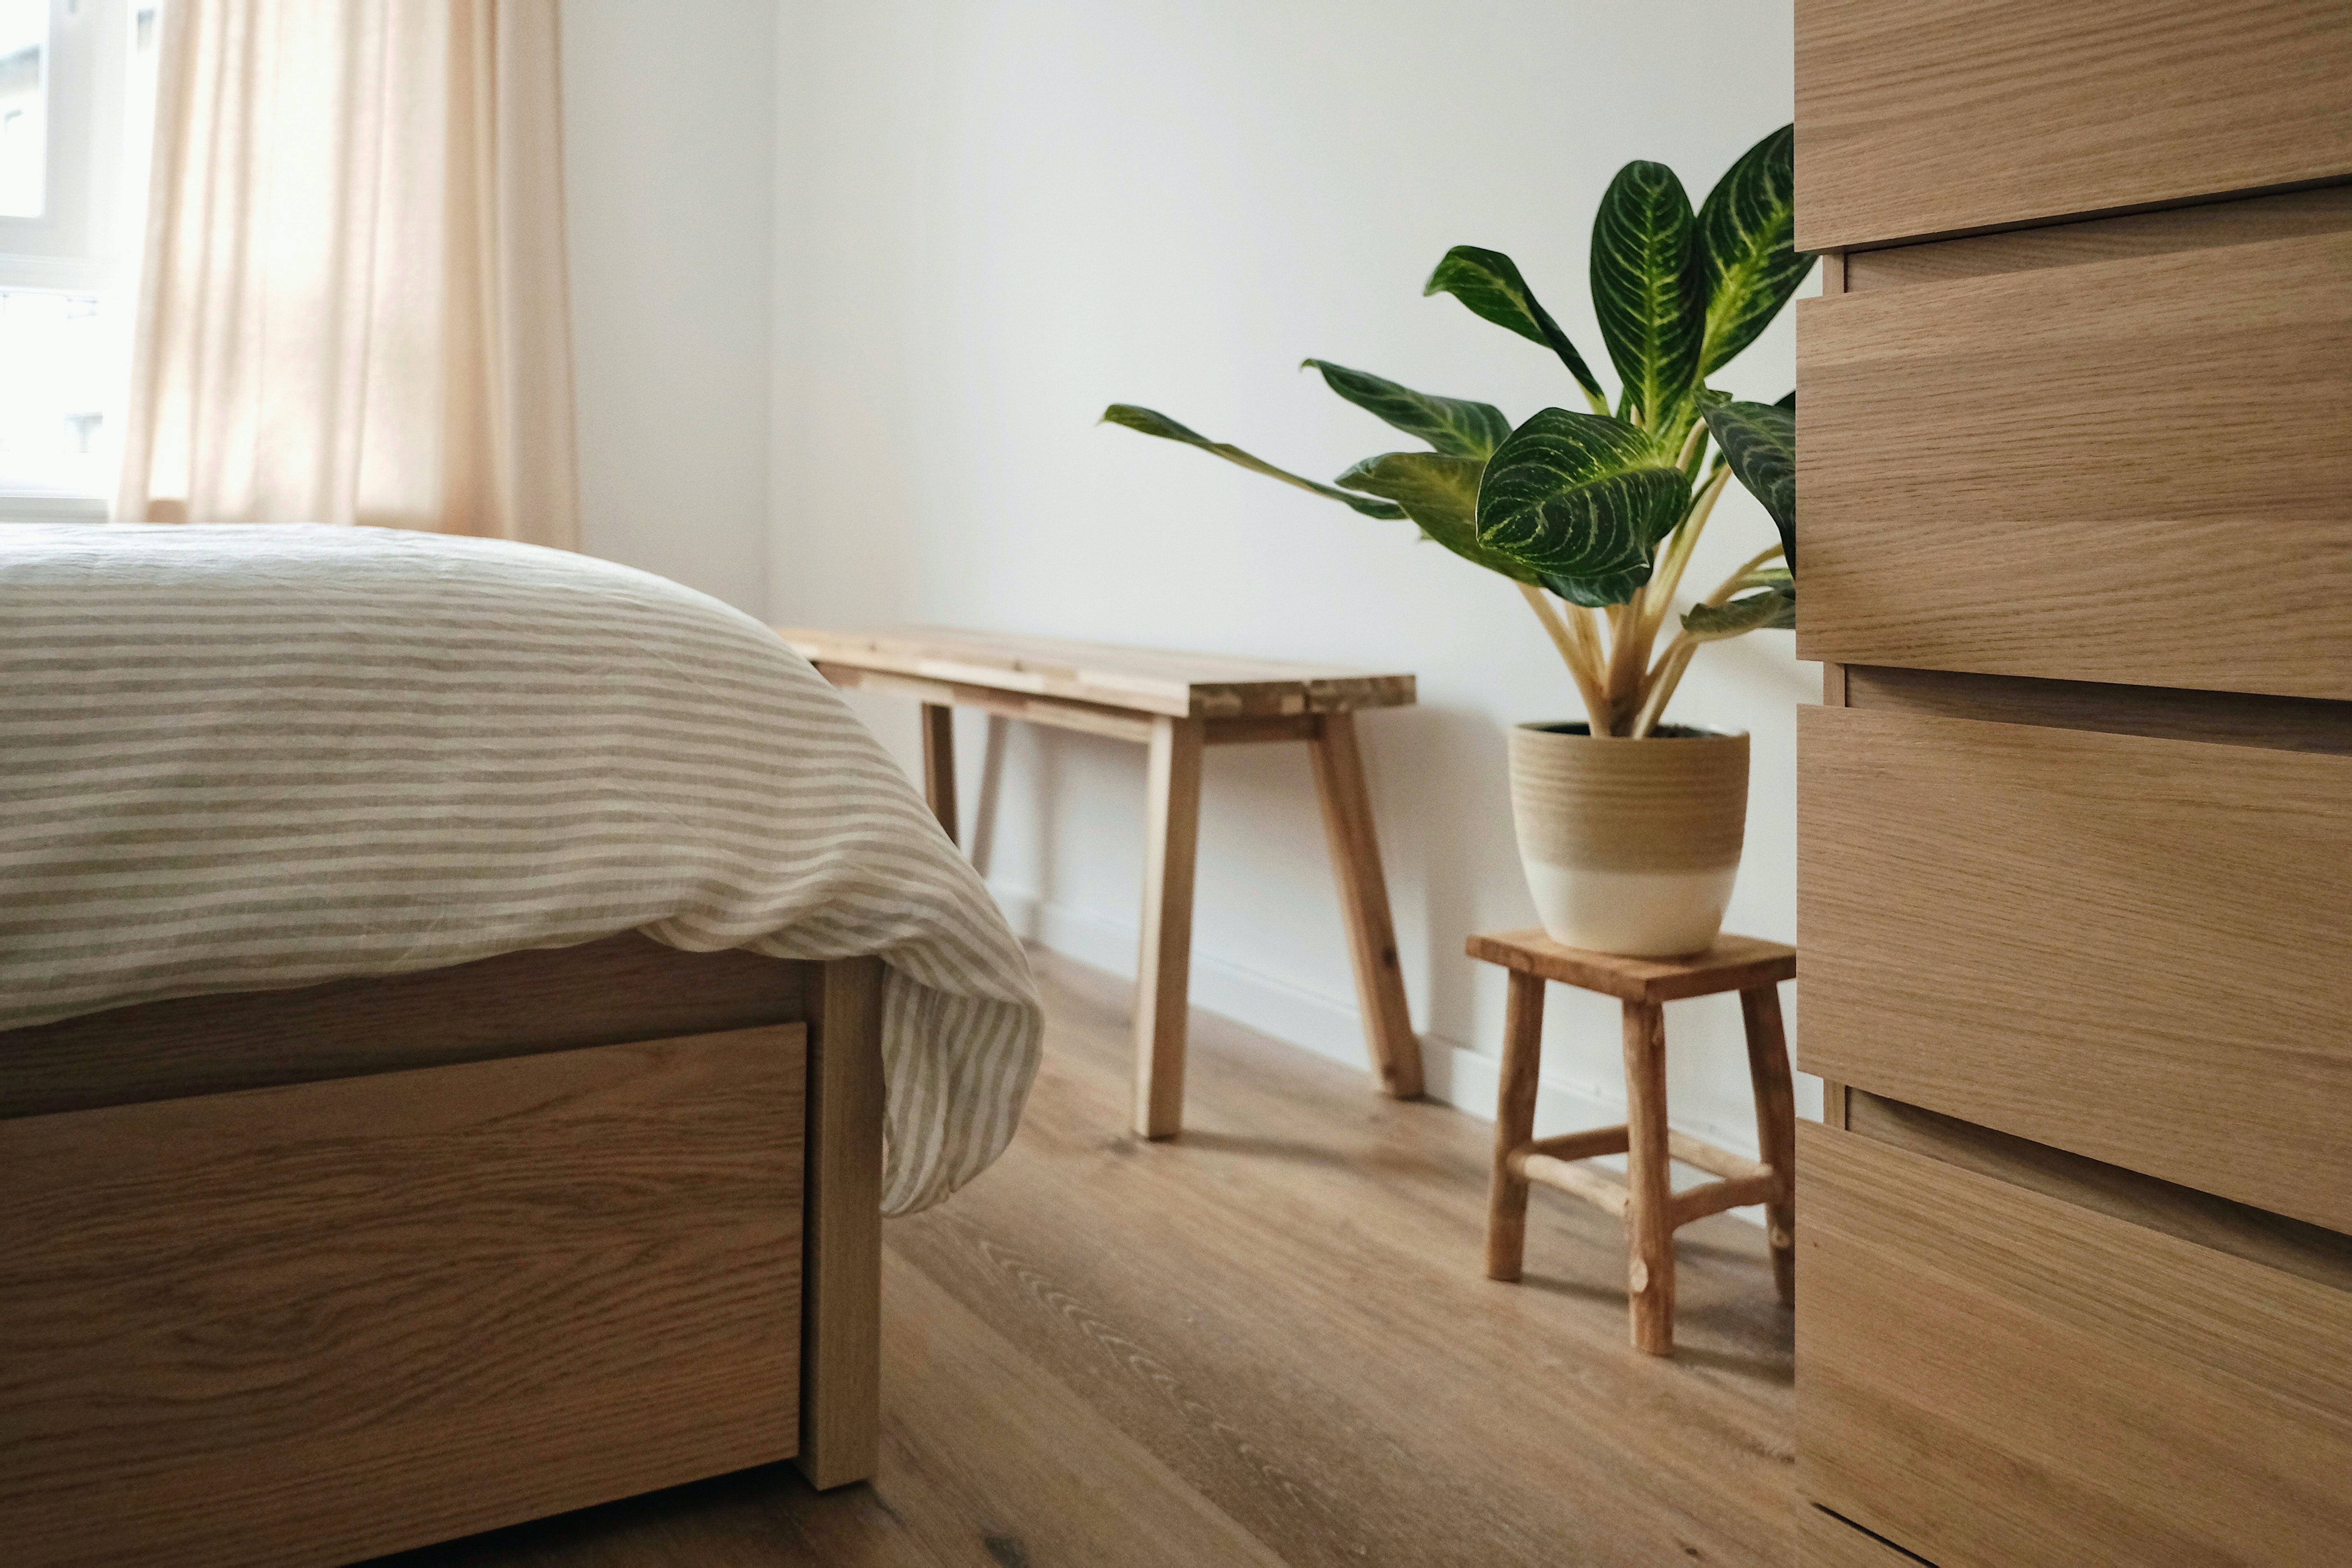 Image of a potted plant, bed, and shelves in a bedroom